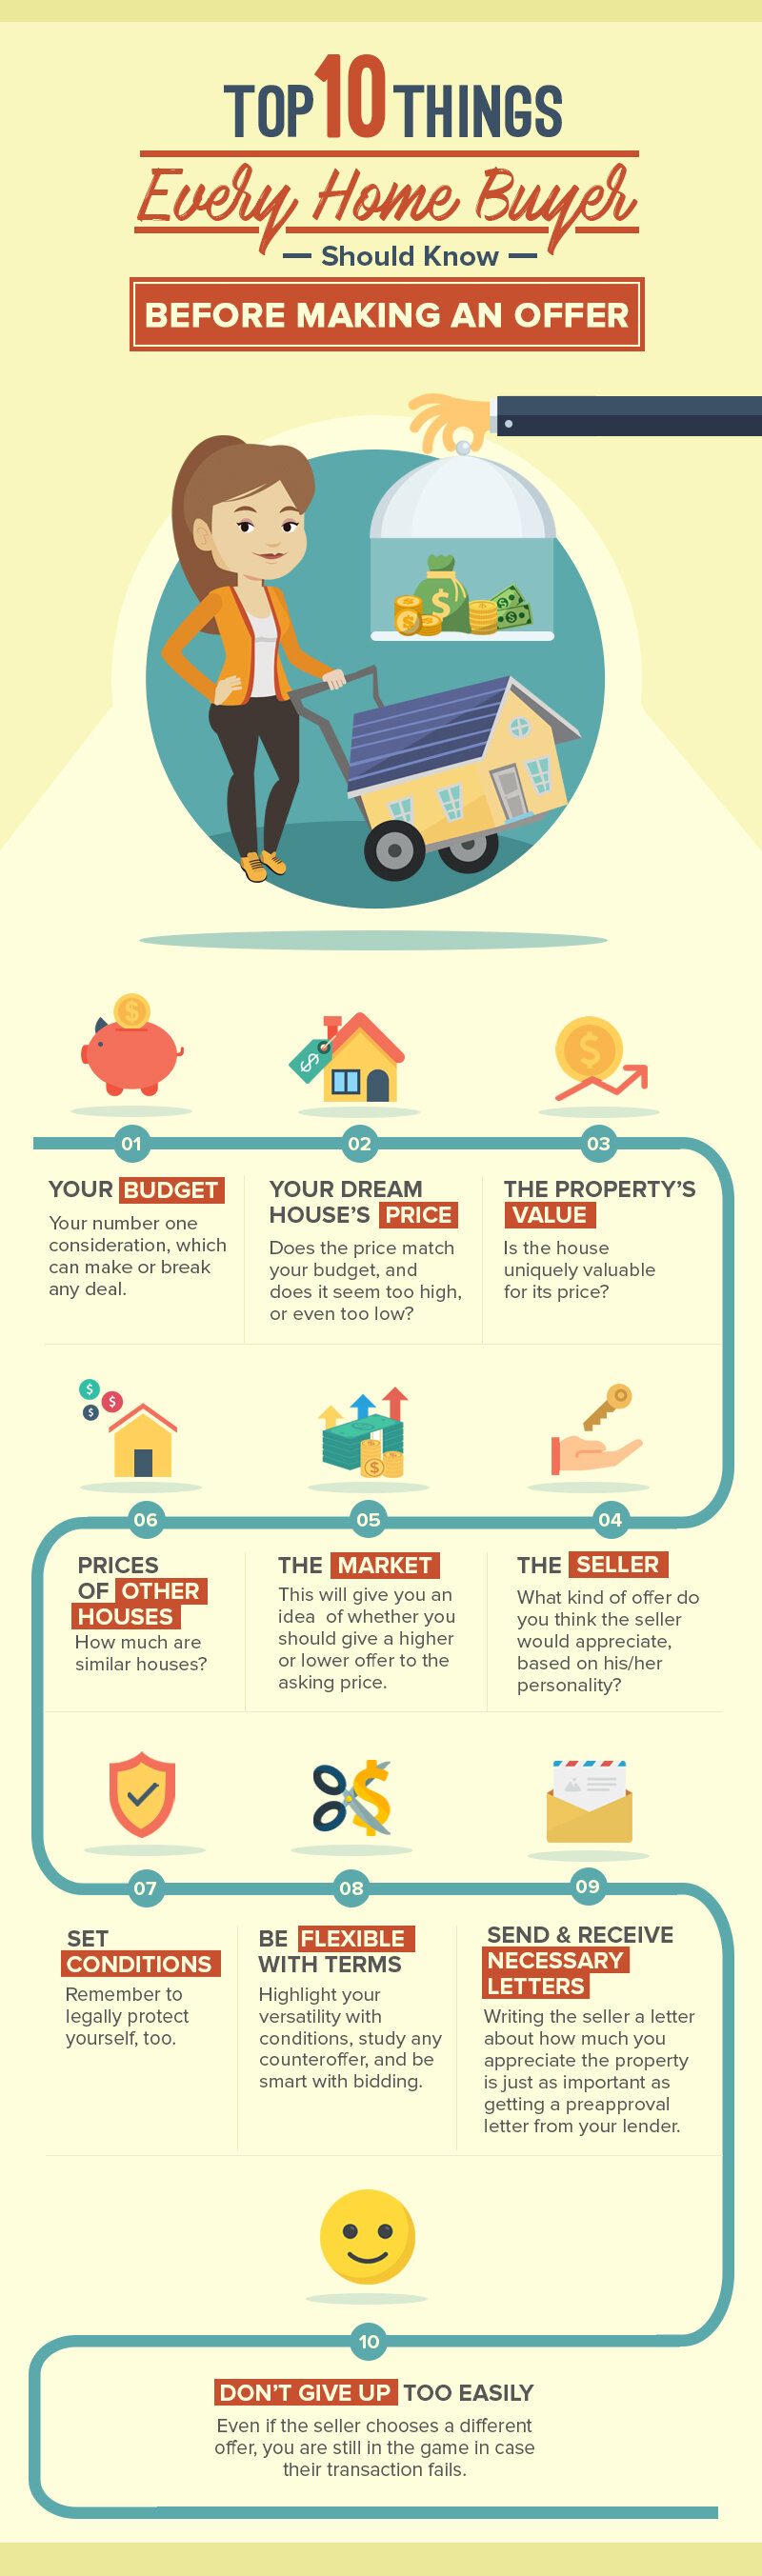 Top 10 Things Every Home Buyer Should Know Before Making An Offer